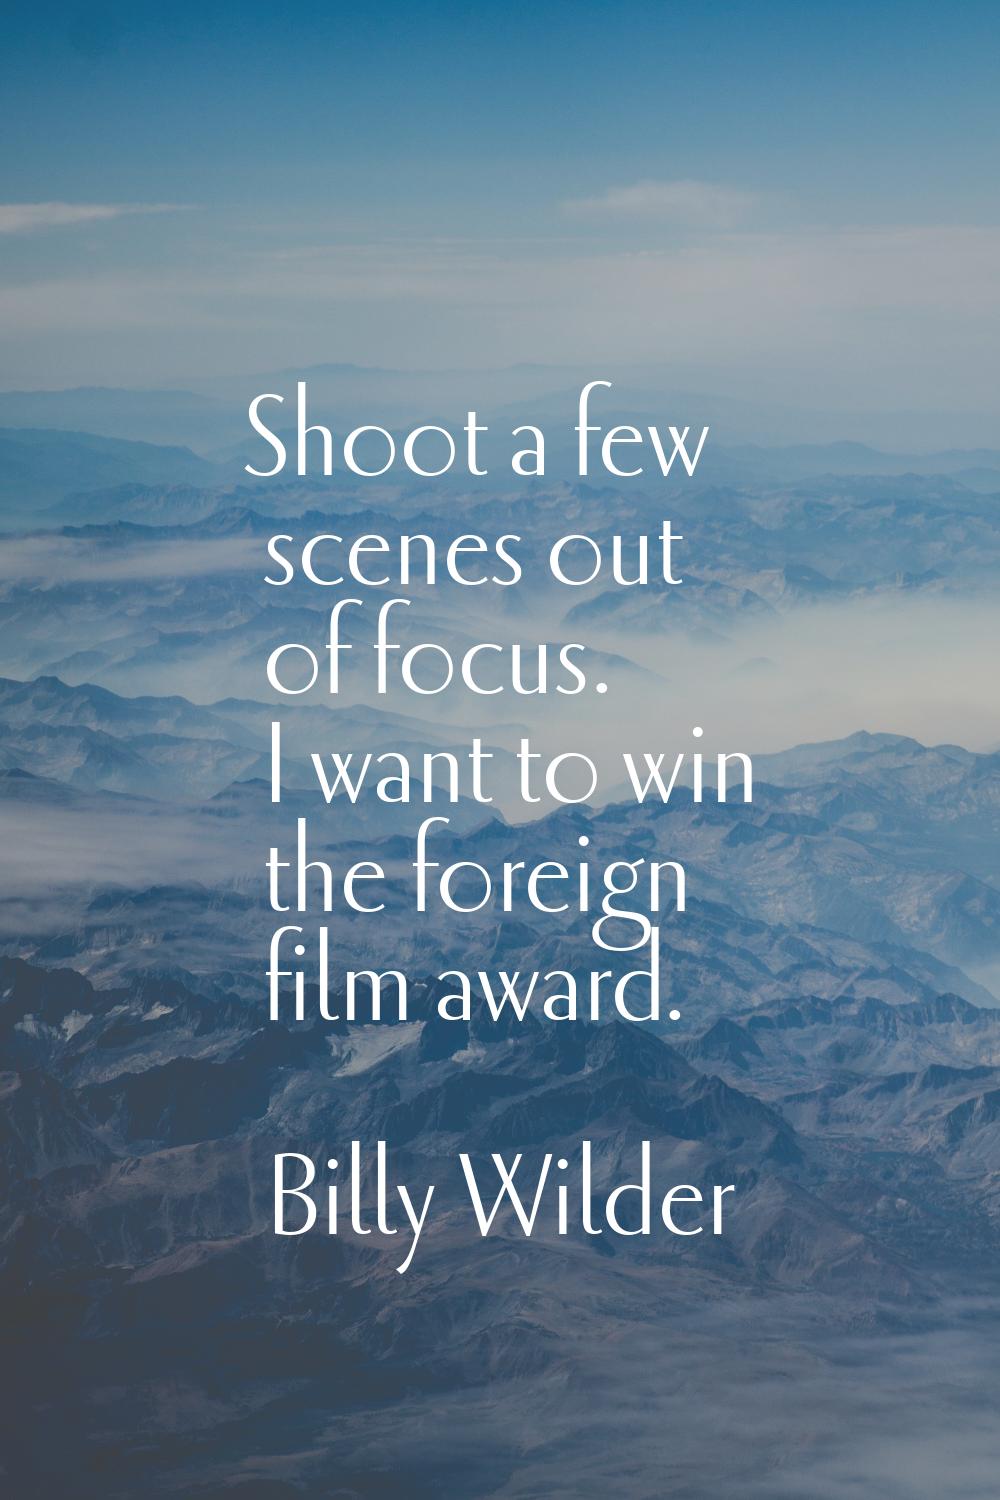 Shoot a few scenes out of focus. I want to win the foreign film award.